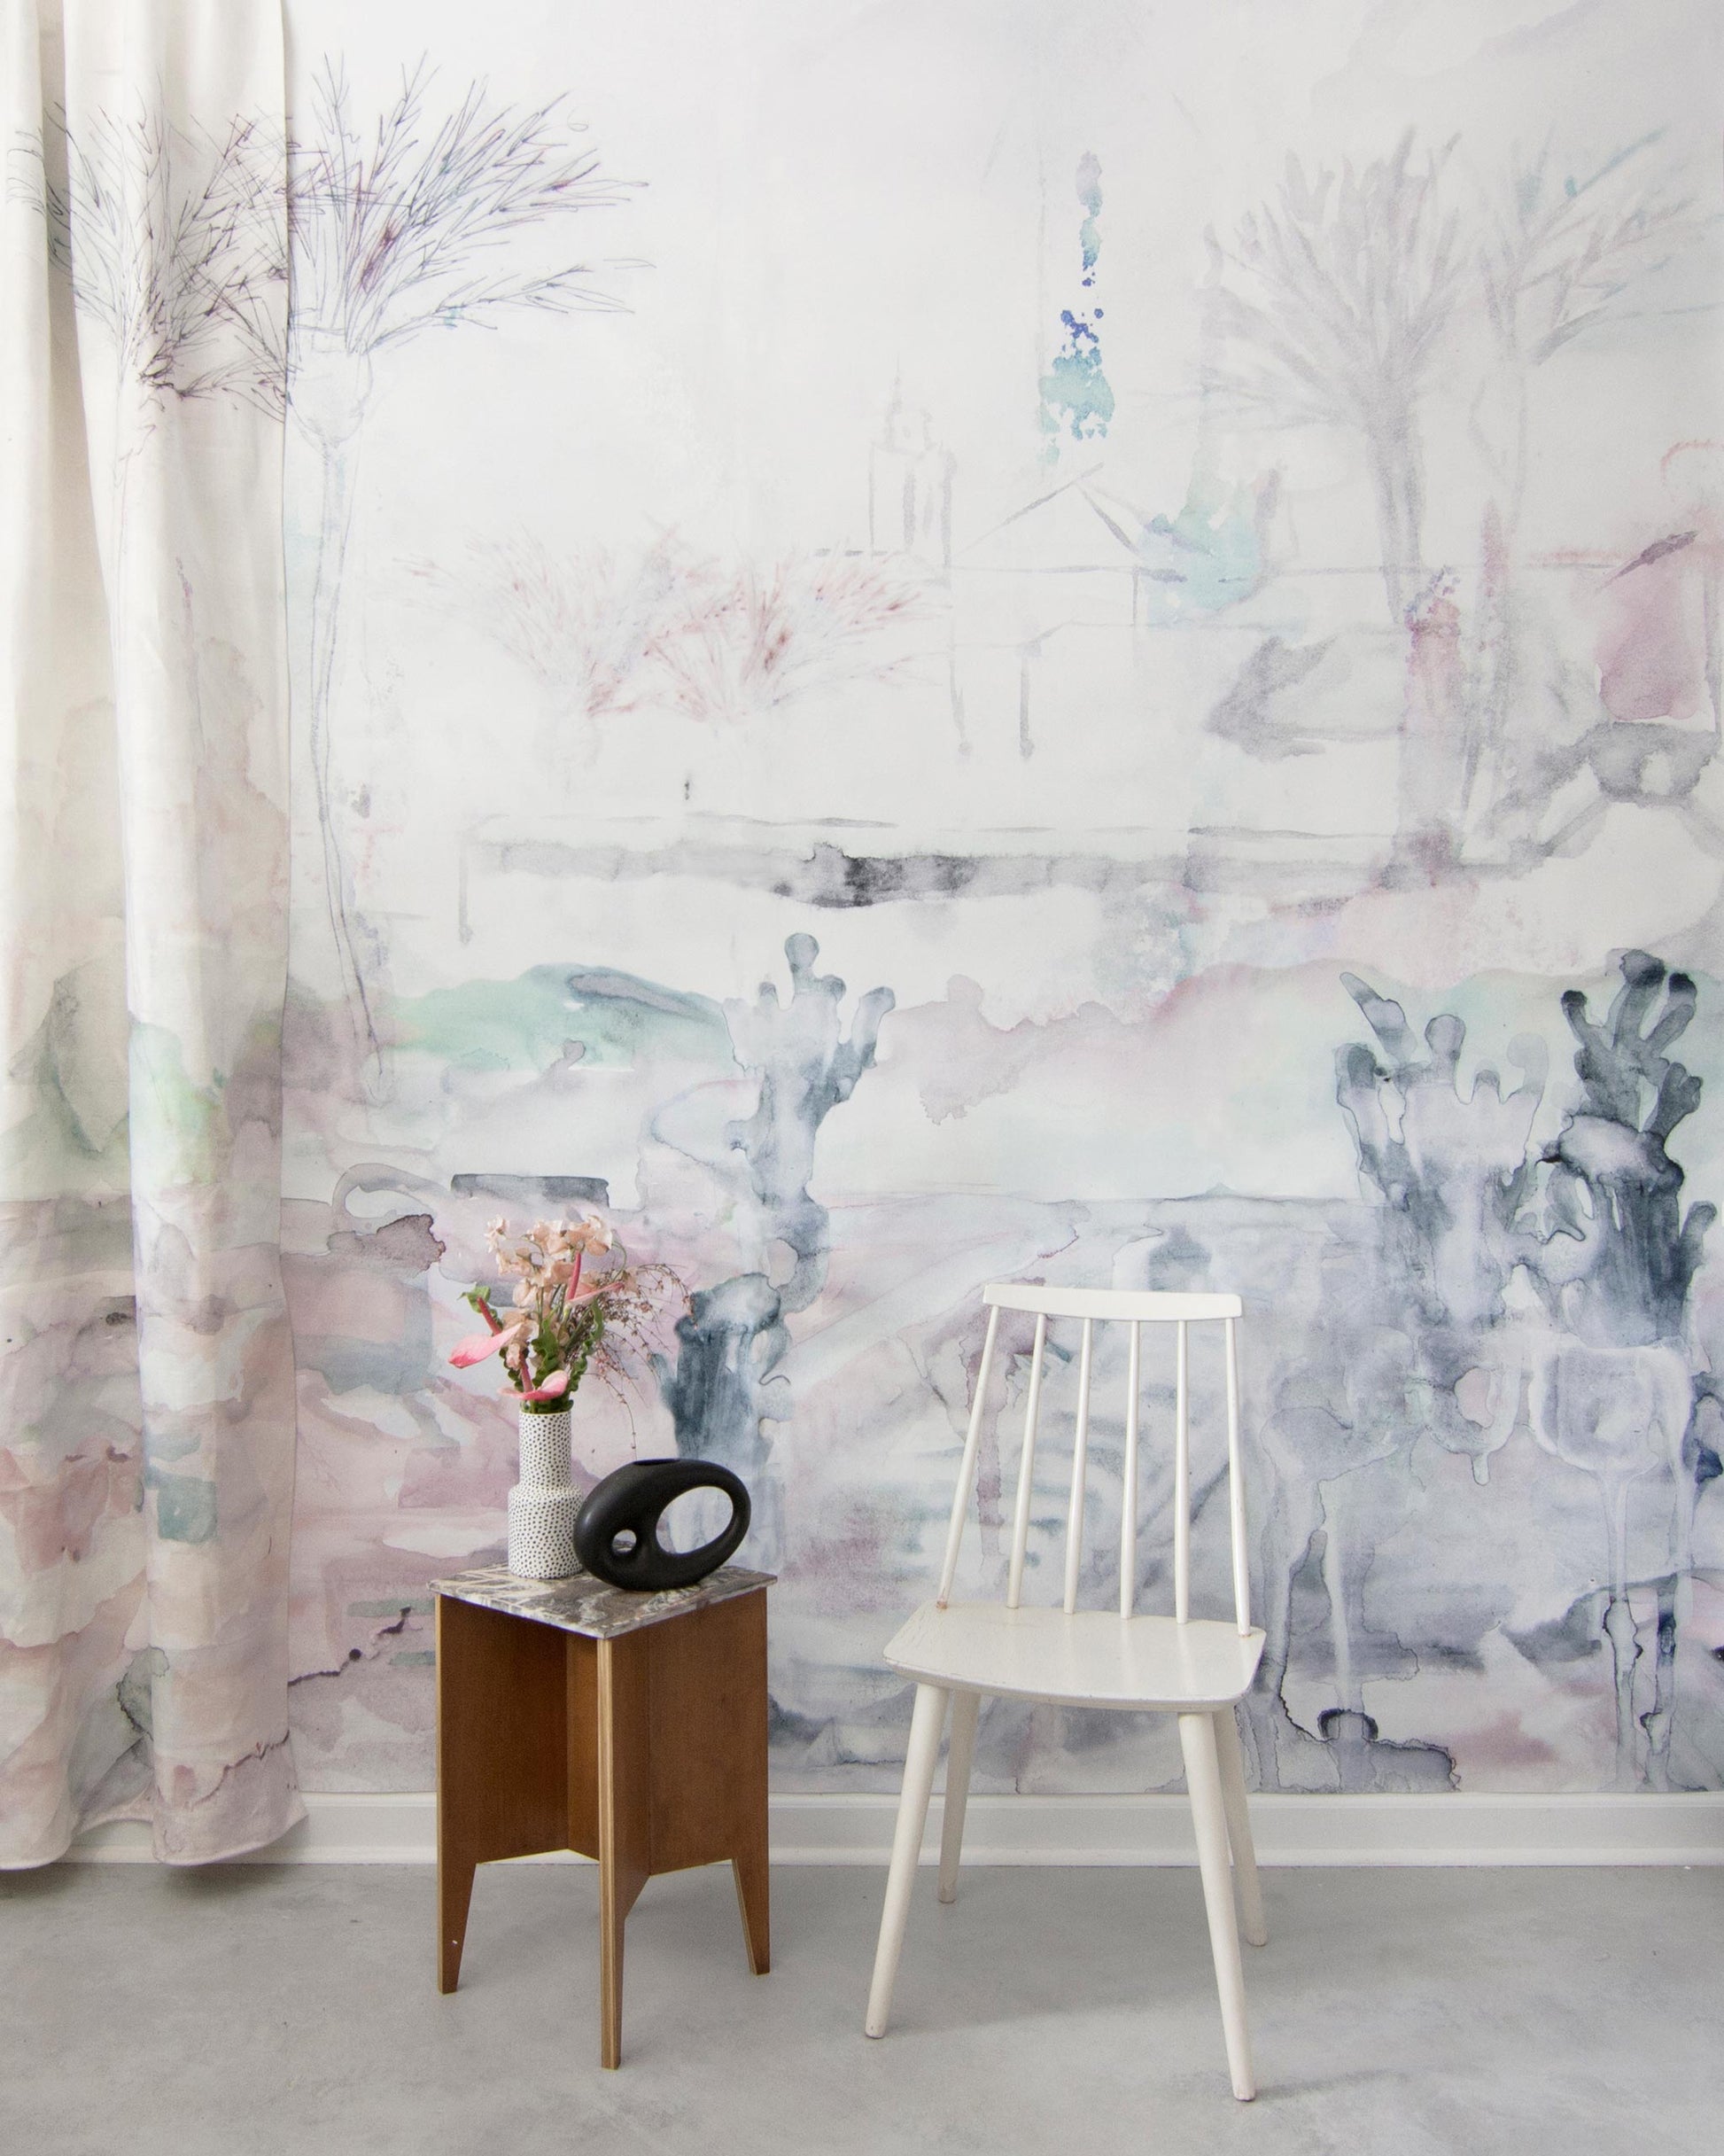 A minimalist room with a white chair, a small wooden side table with a vase of flowers, and a large mural artwork of the Palmeraie Fabric||Duomo cityscape on the wall.